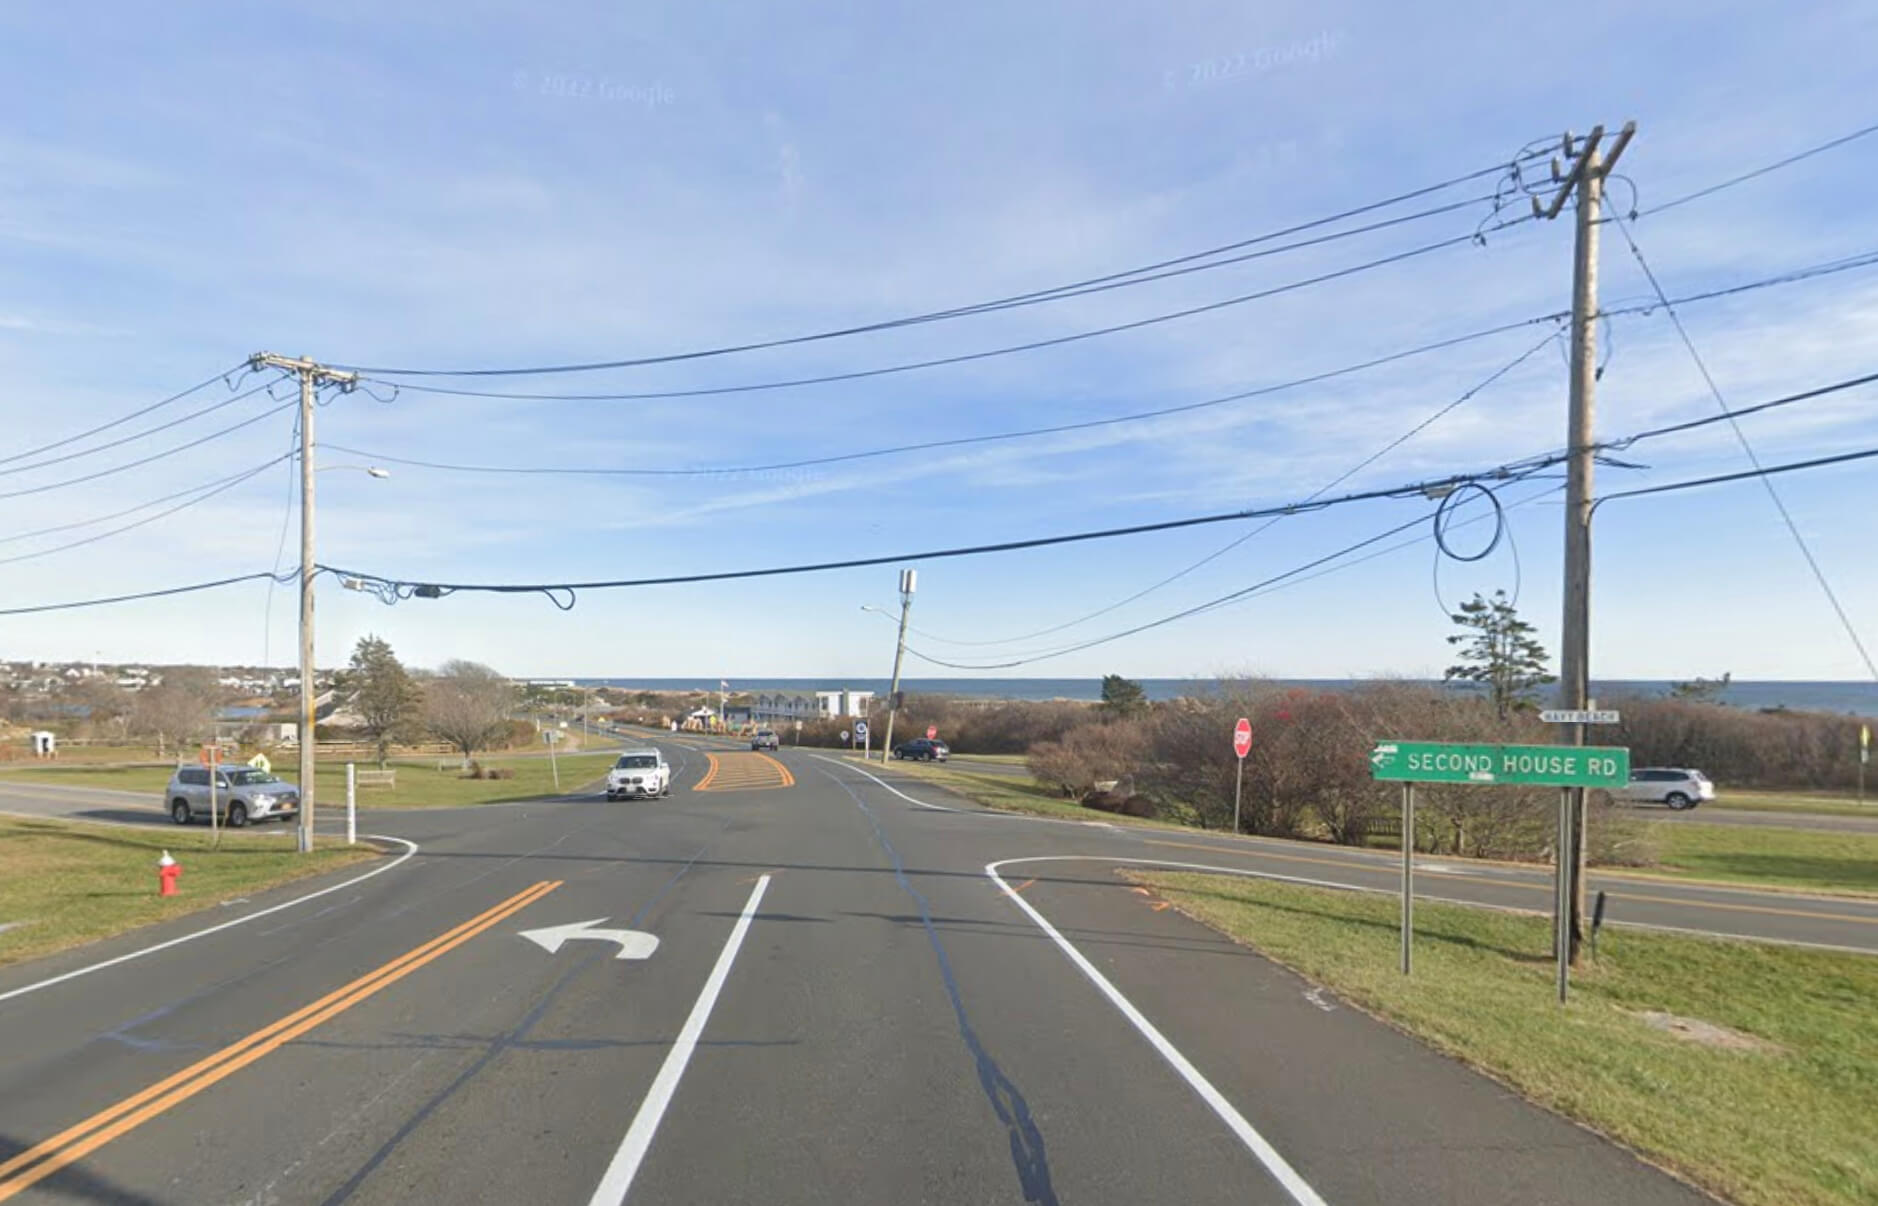 The ugly utility lines at Montauk Highway and Second House Road are a thing of the past